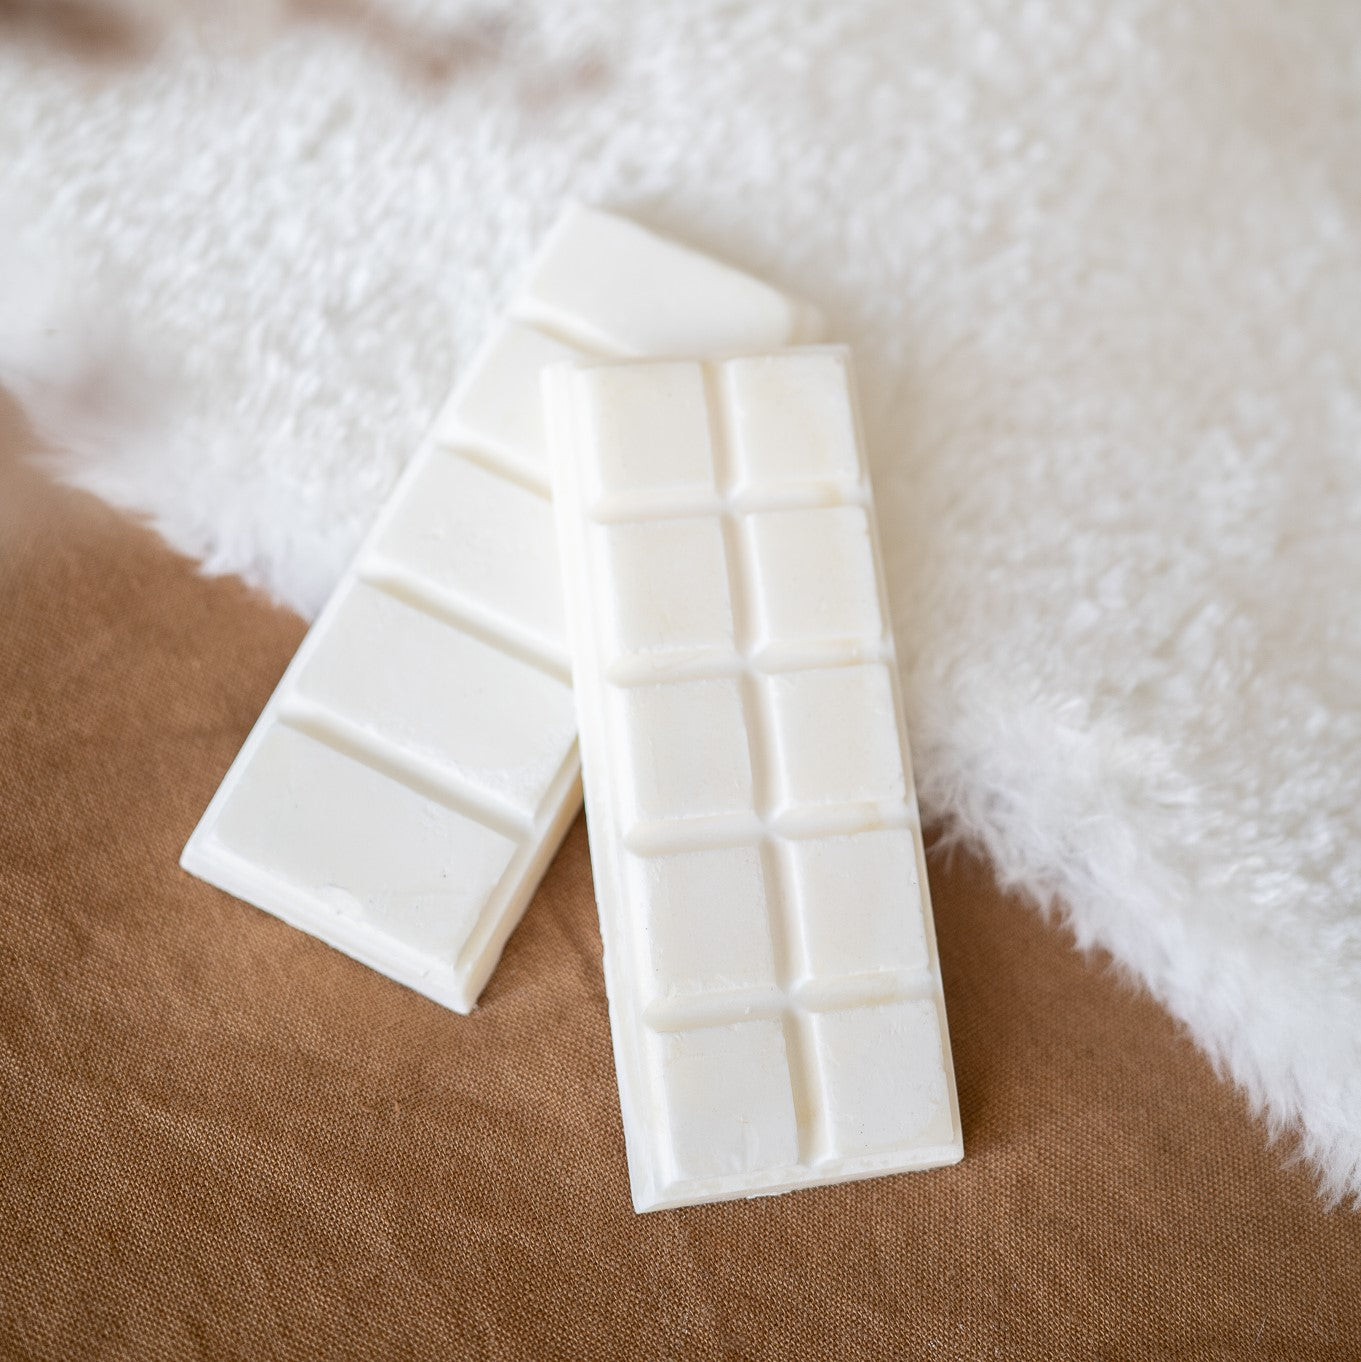 Two break-away wax melts laying on a rug. Made by Paige Soy Candles